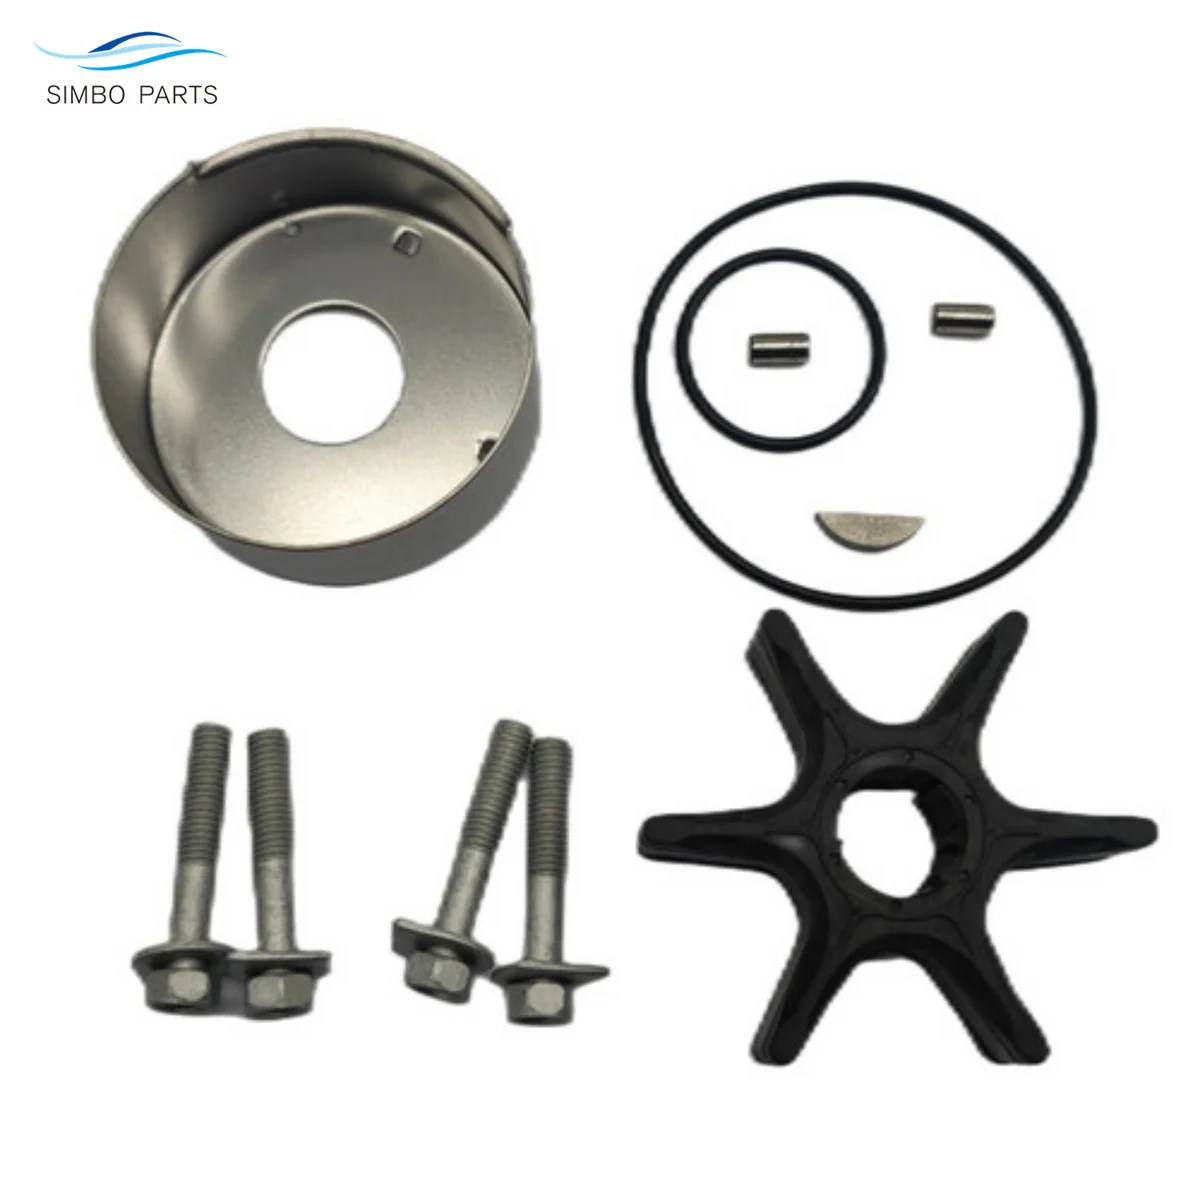 

Water Pump Impeller Kit For Yamaha F/VF 225 250 HP 4 stroke VZ 200 225 250 HP 2 stroke Outboard 6P2-W0078-00 6CB-W0078-00